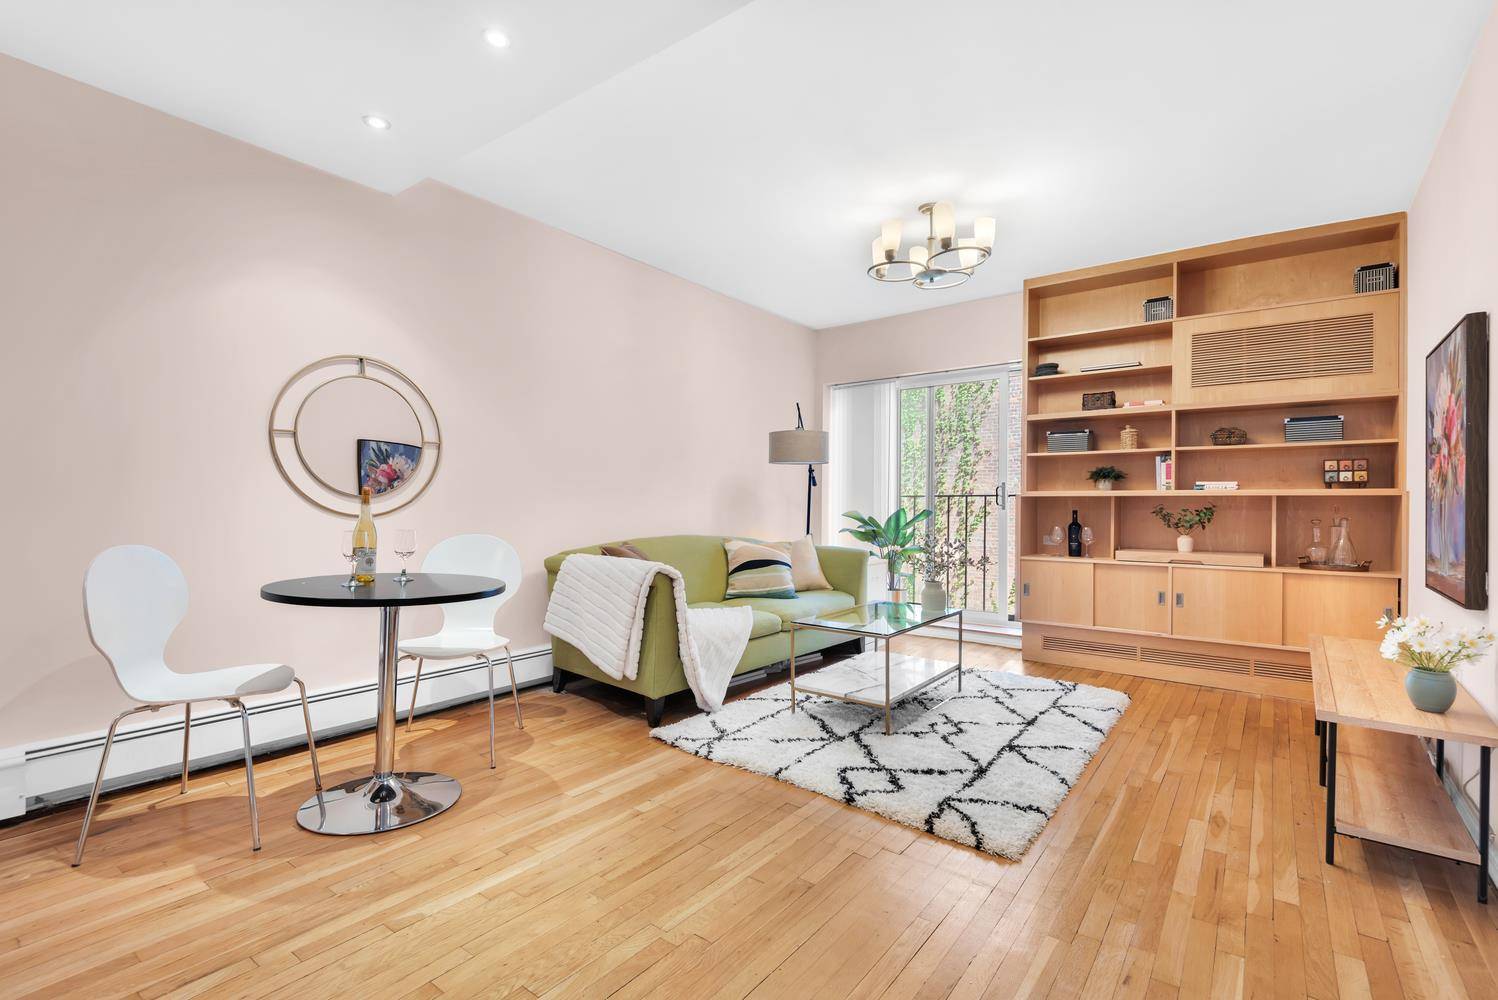 This one bedroom apartment on Hicks Street and Love Lane in the heart of Brooklyn Heights is the perfect place to call home.